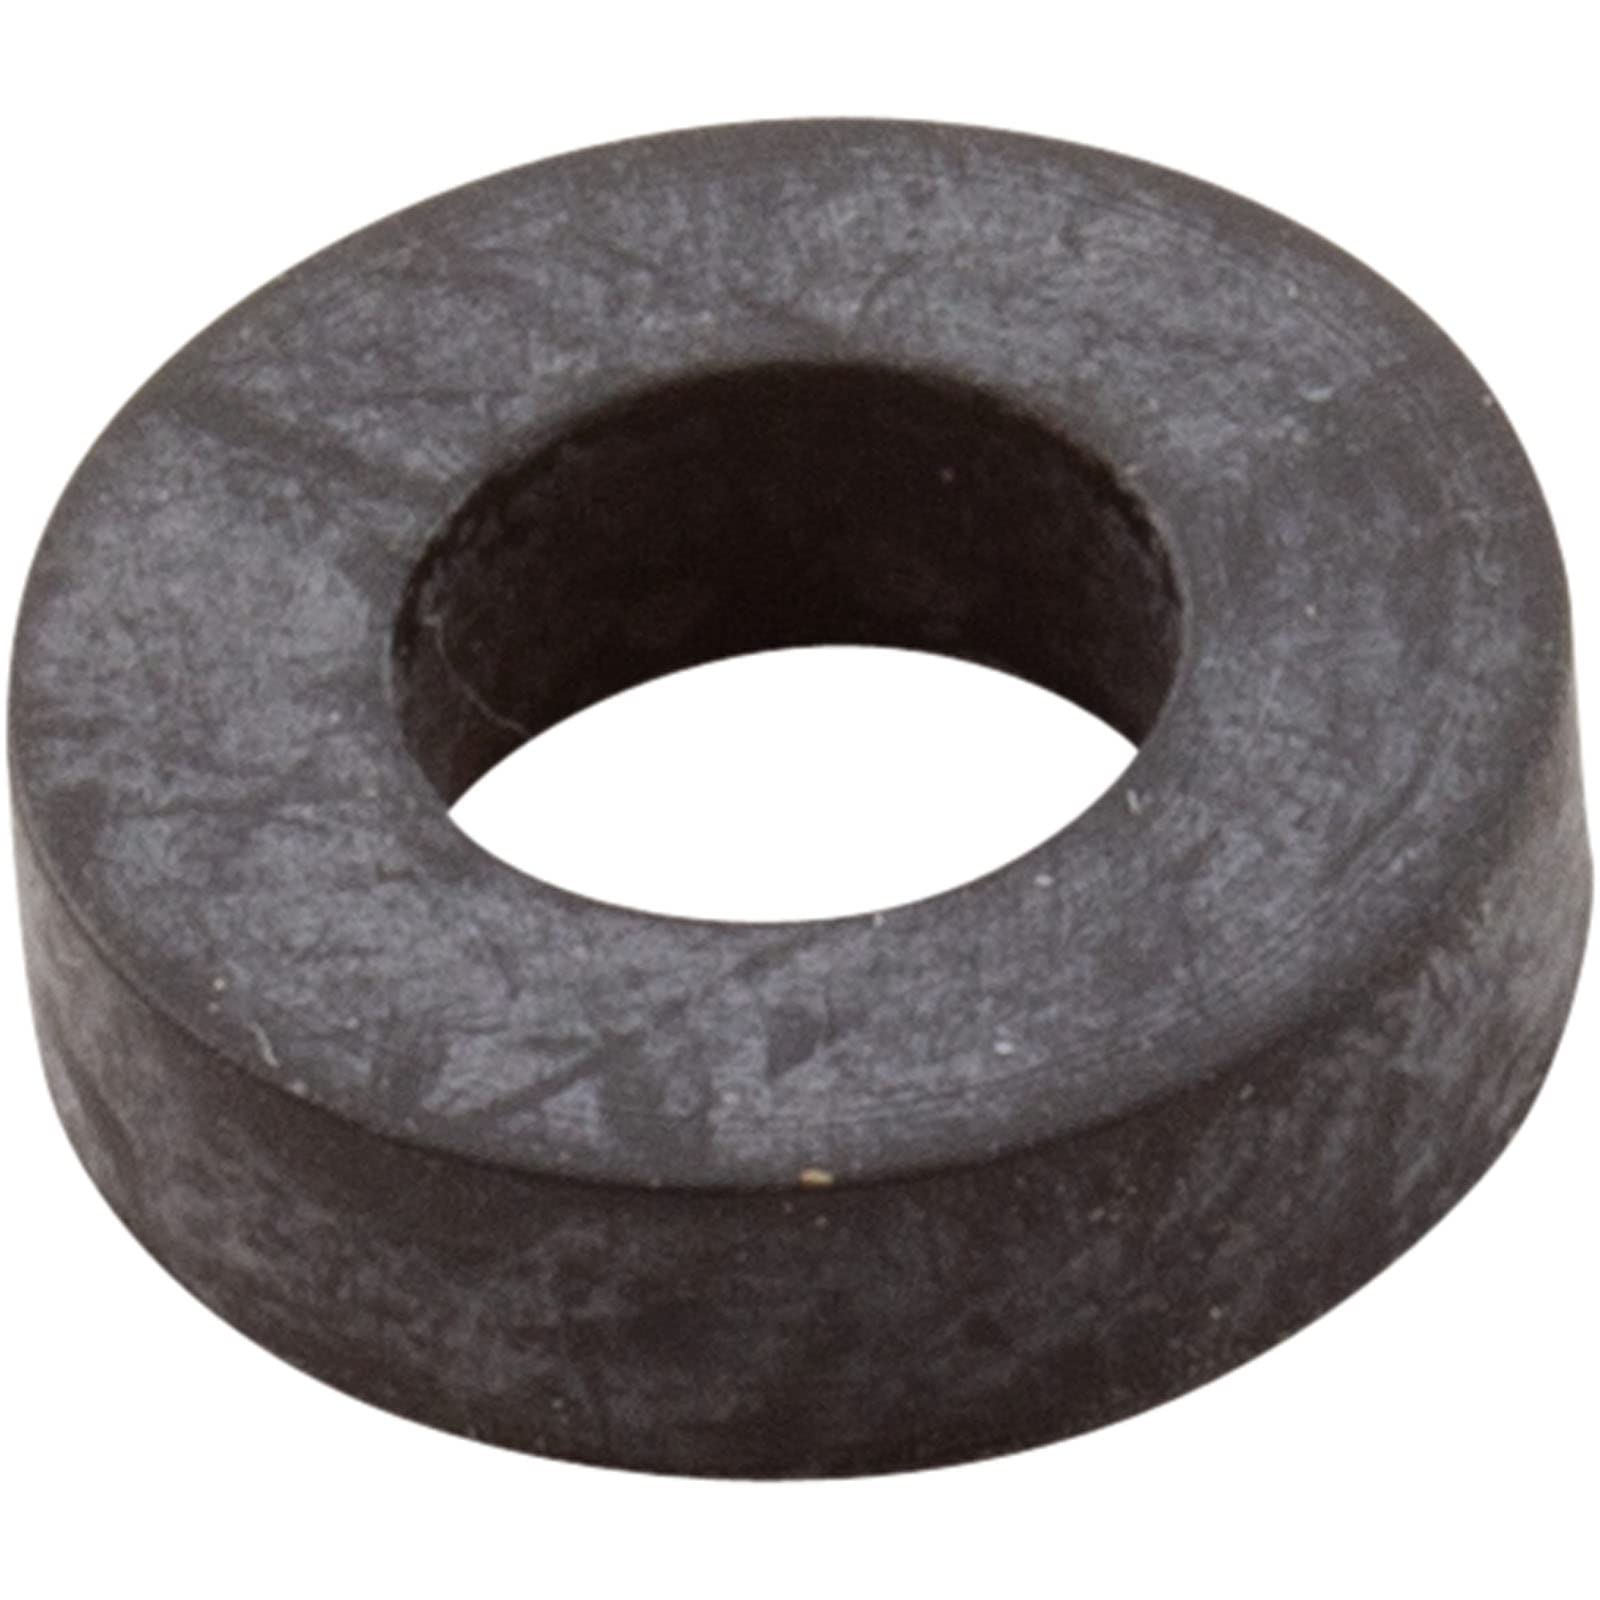 Pentair 075713 Rubber Washer Replacement Inground and Commercial Pool/Spa Pump